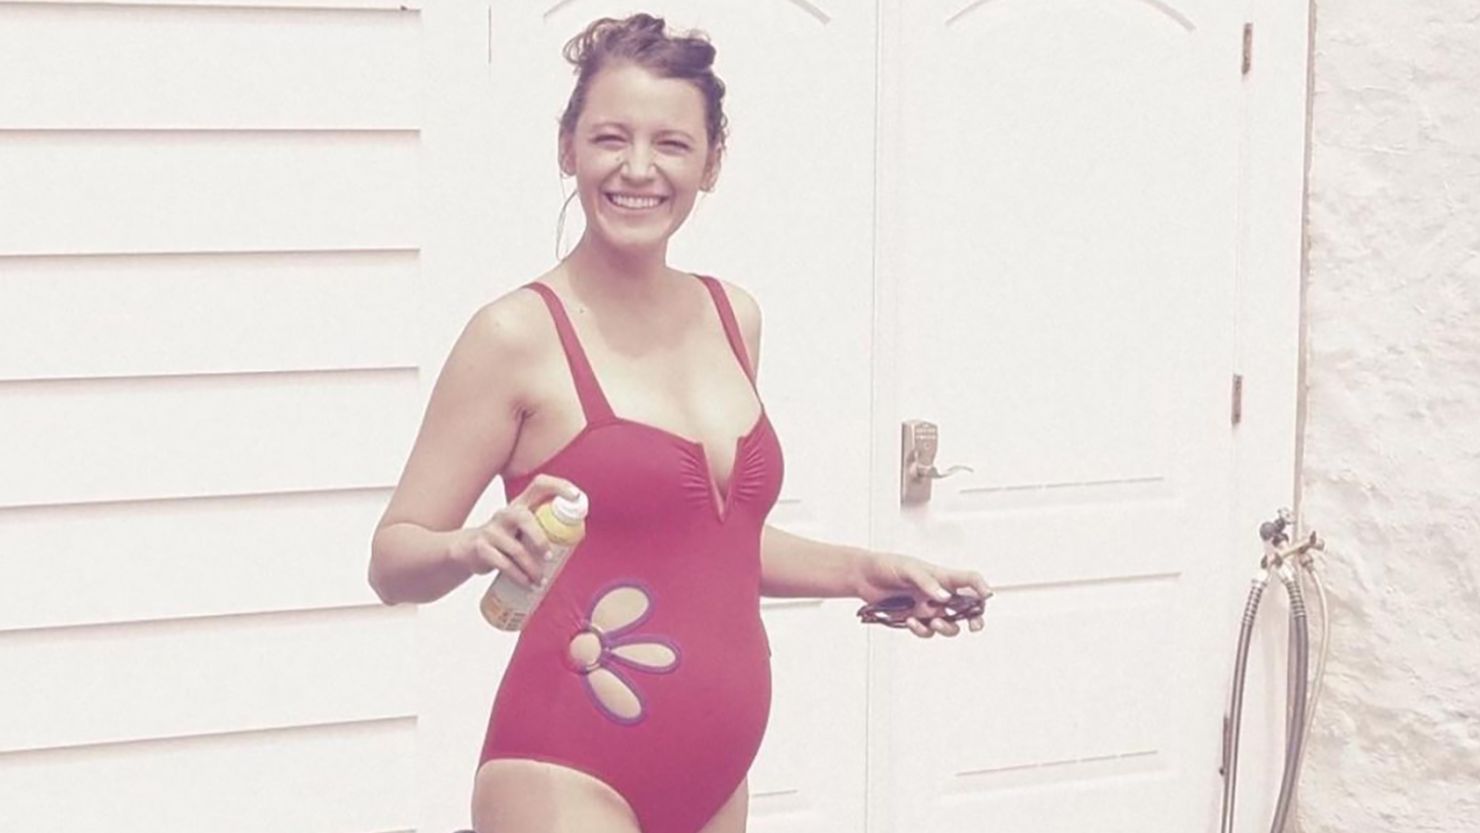 Blake Lively posted her own pregnancy photos. 